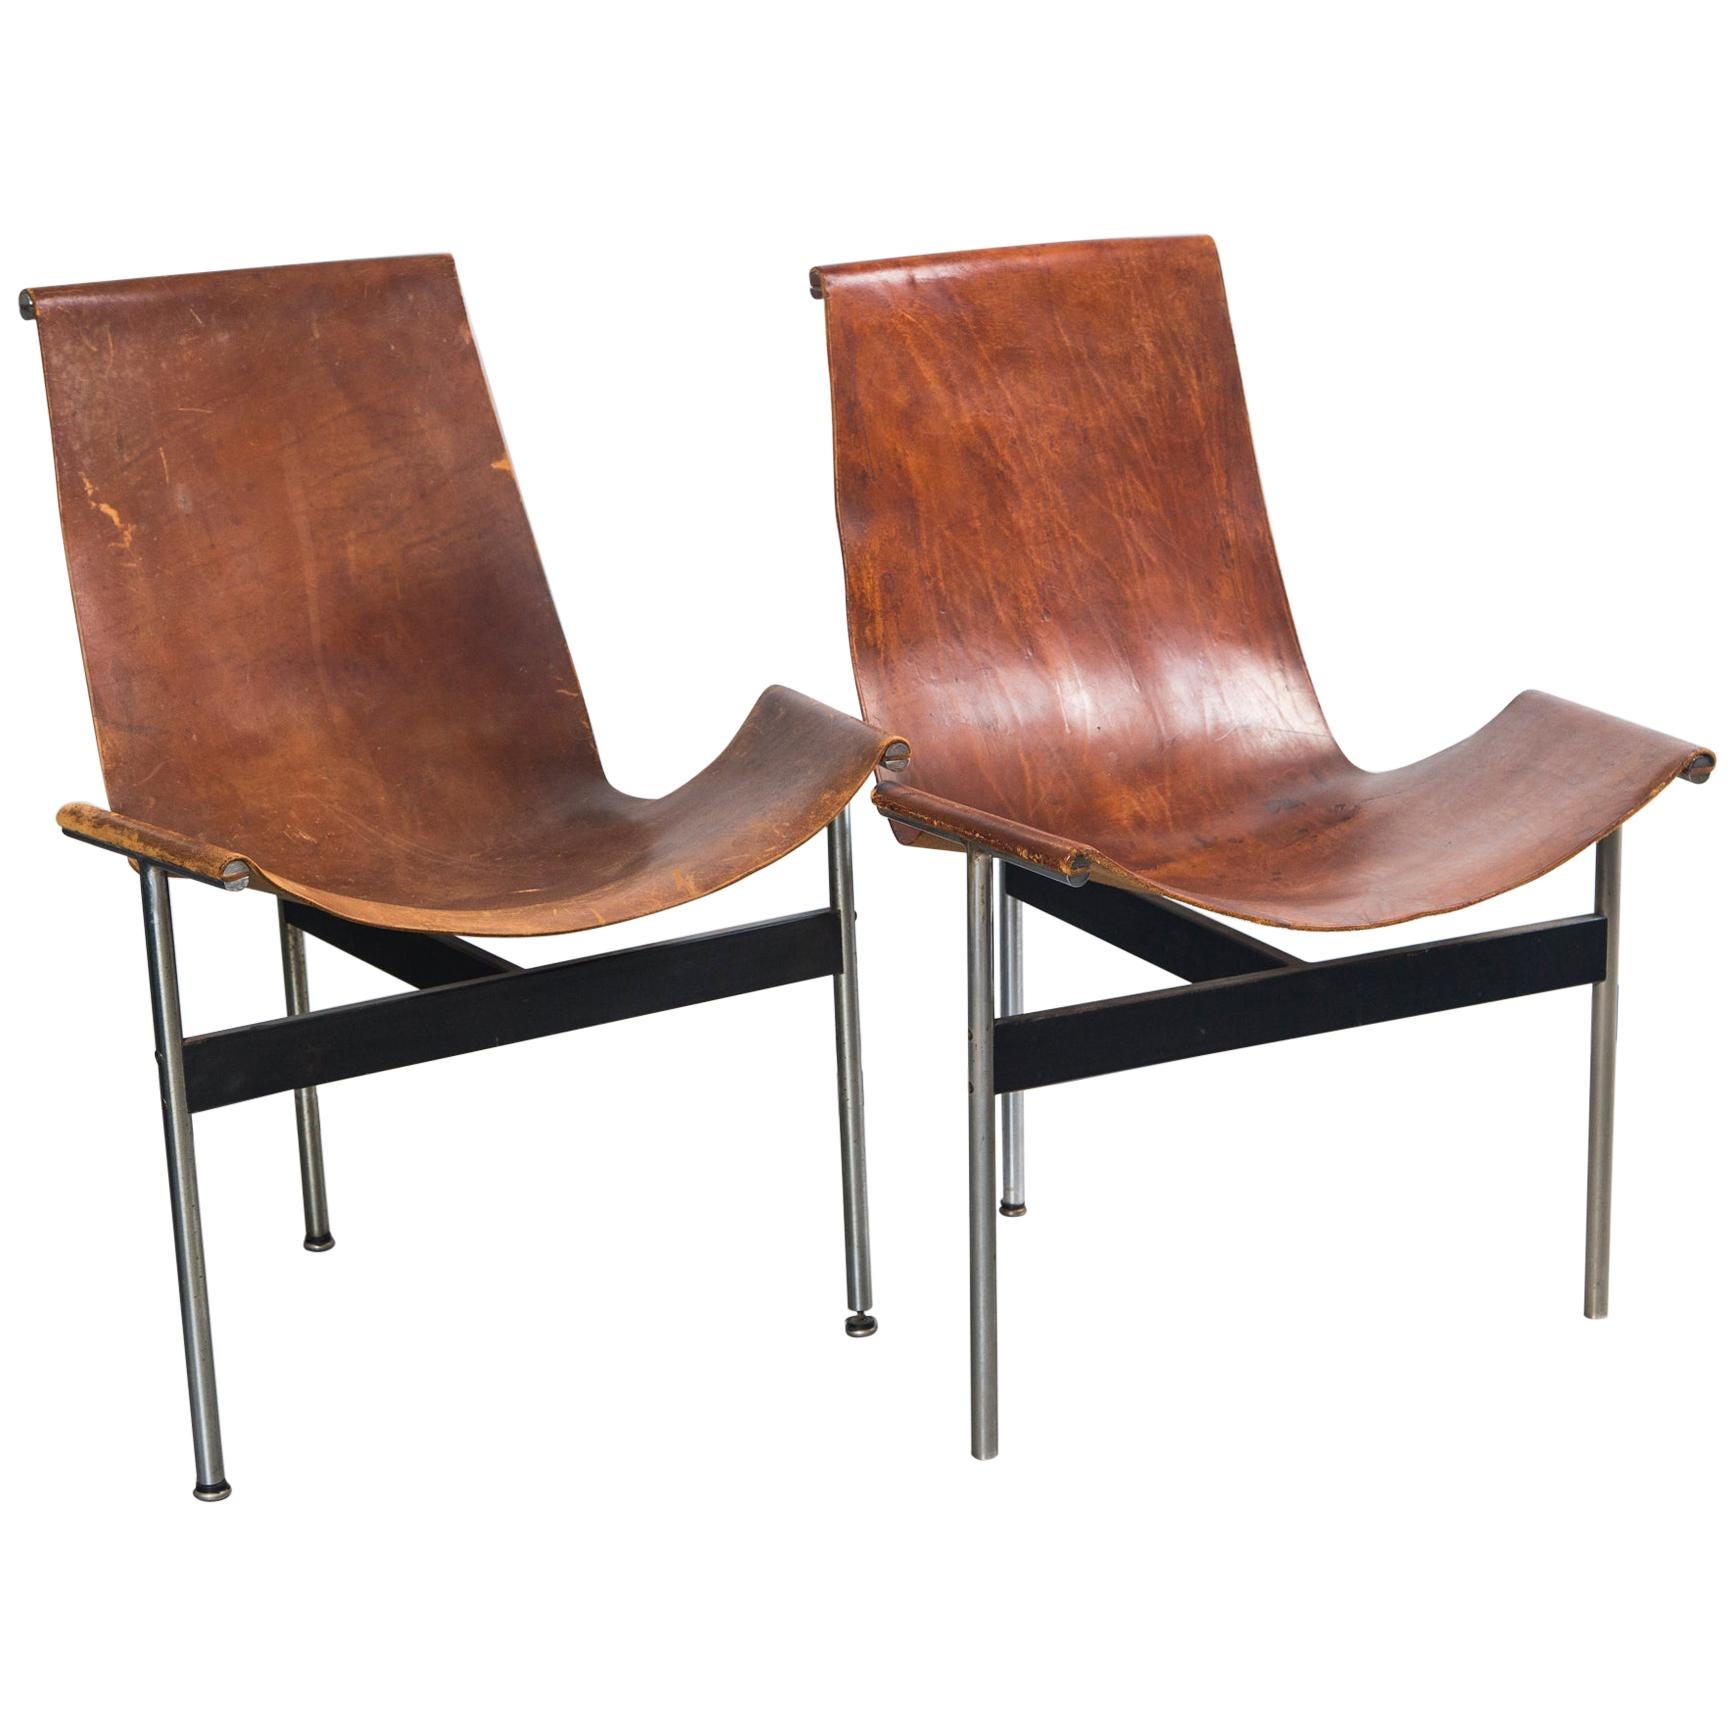 T-Chairs by William Katavolos, Ross Littel & Douglas Kelly for Laverne Originals